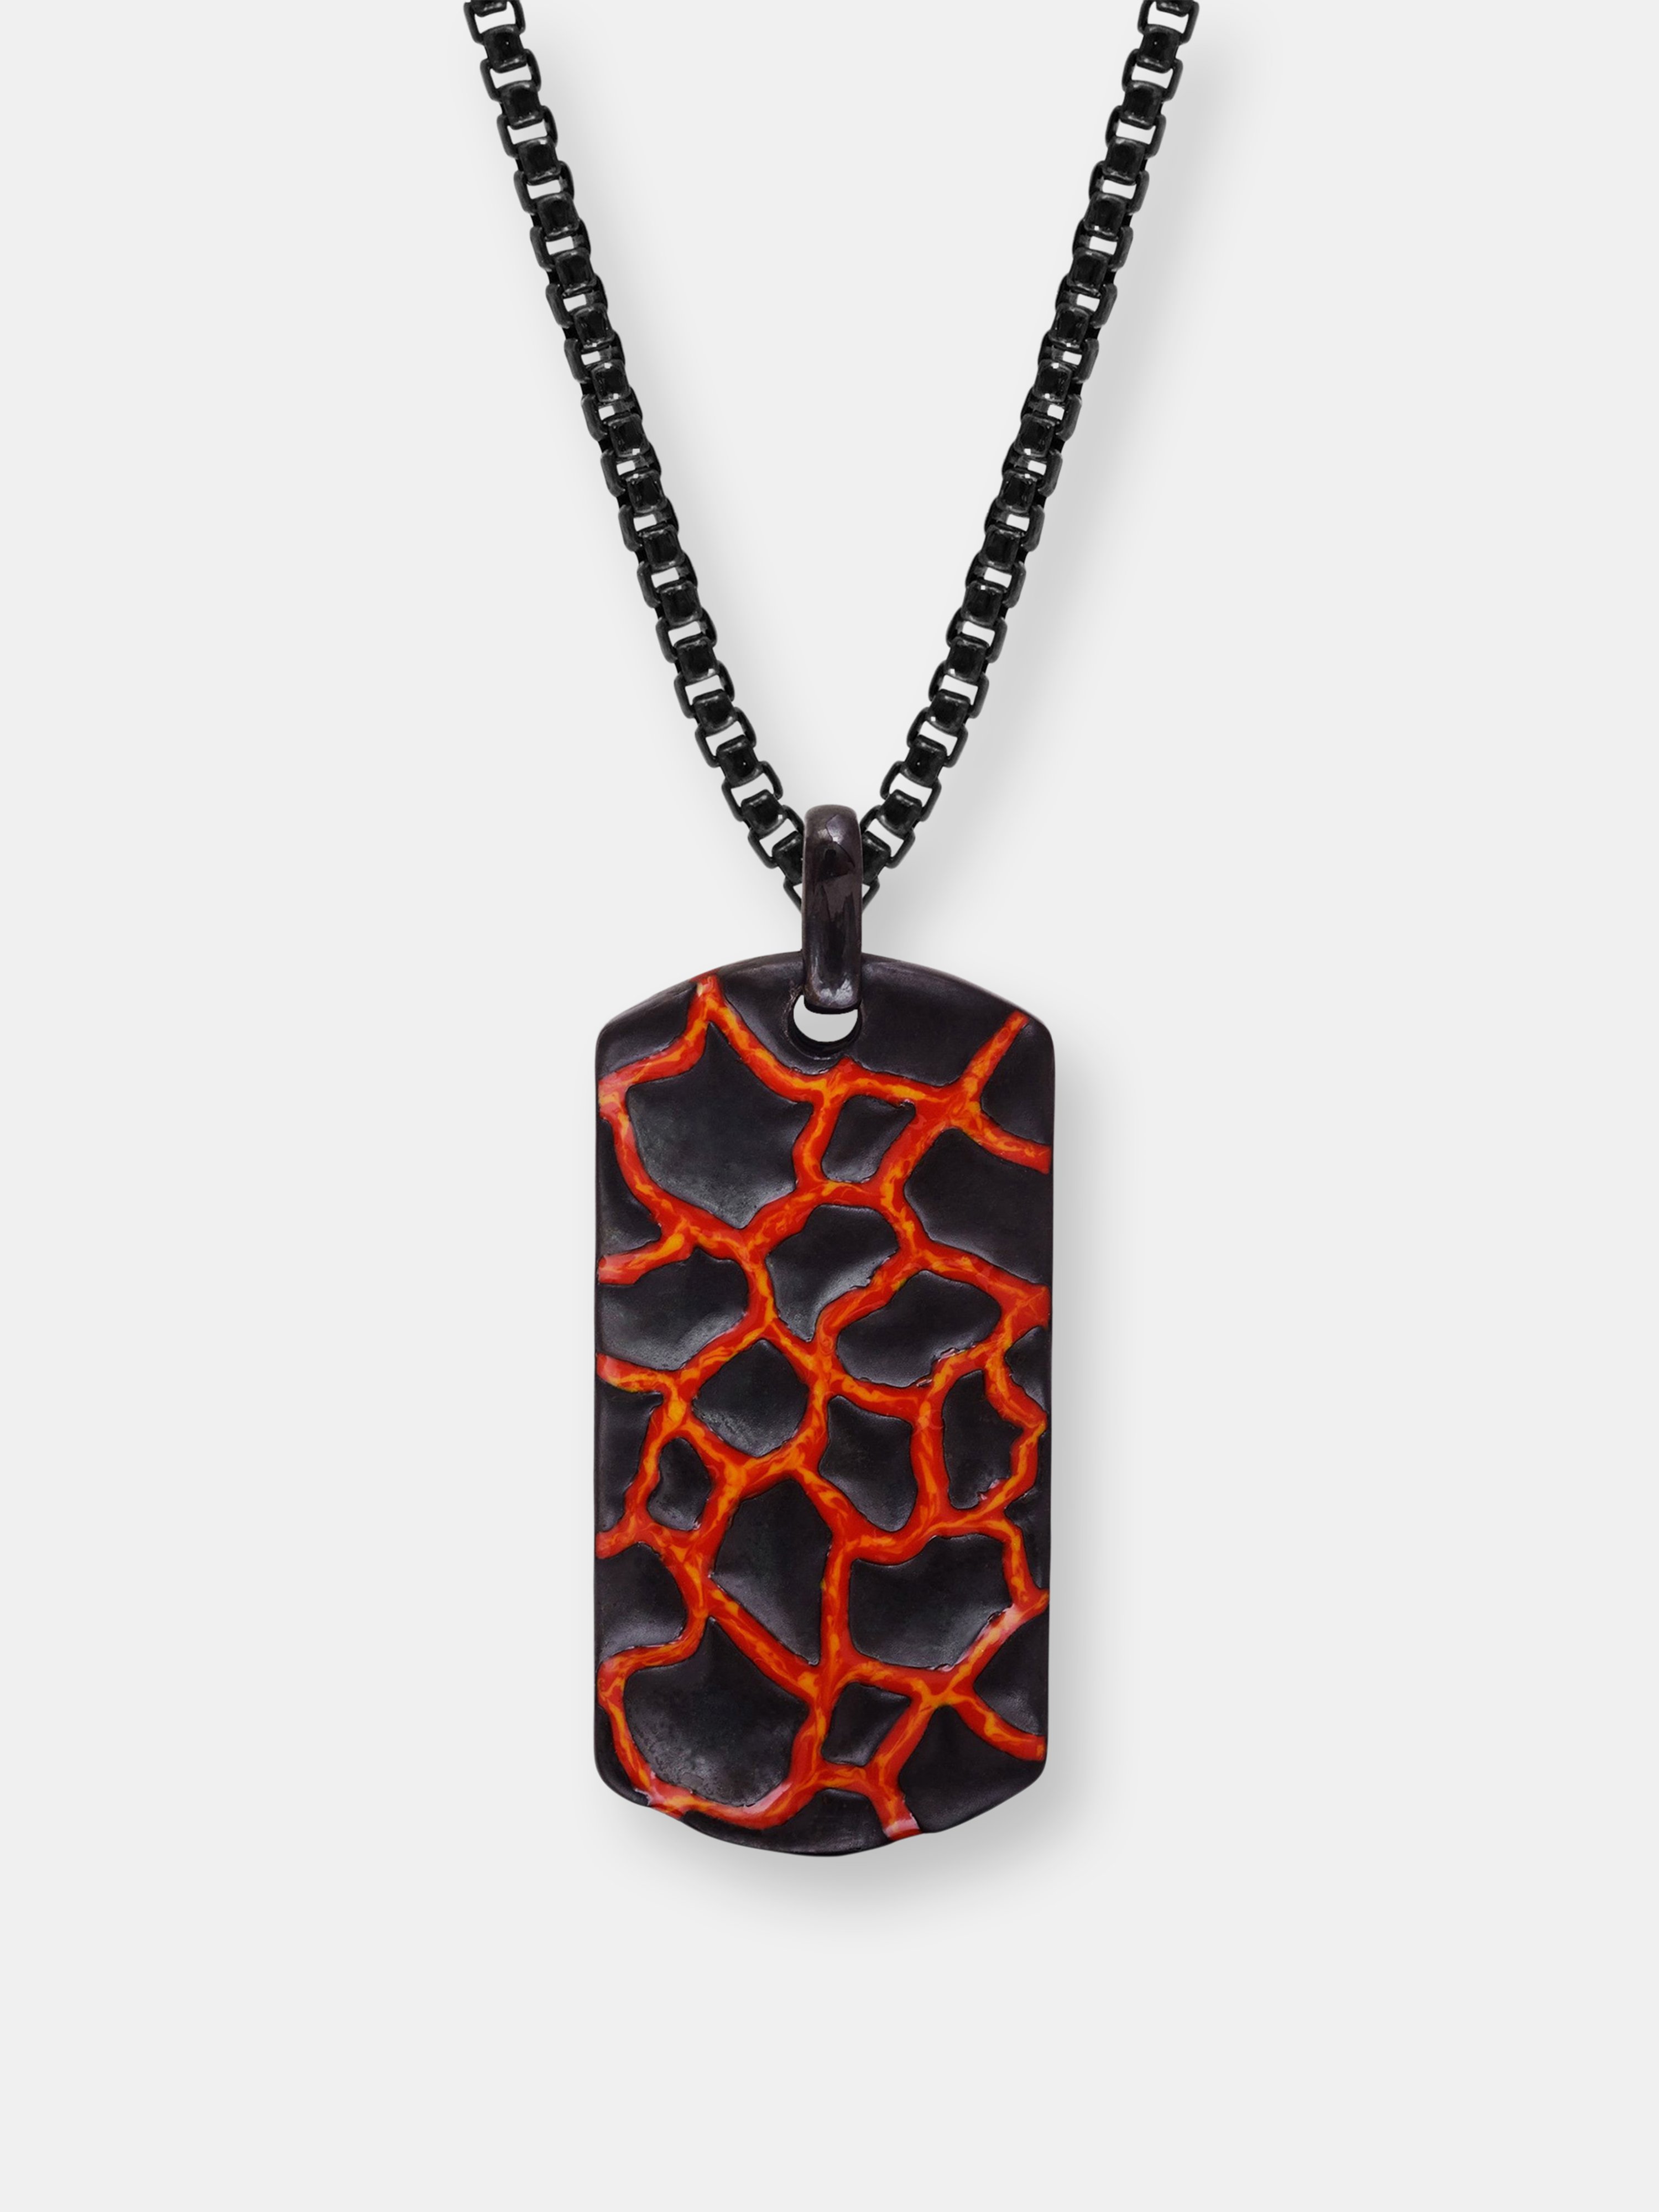 LUVMYJEWELRY LUVMYJEWELRY EARTH & FIRE BLACK RHODIUM PLATED STERLING SILVER TEXTURED RED ORANGE ENAMEL TAG